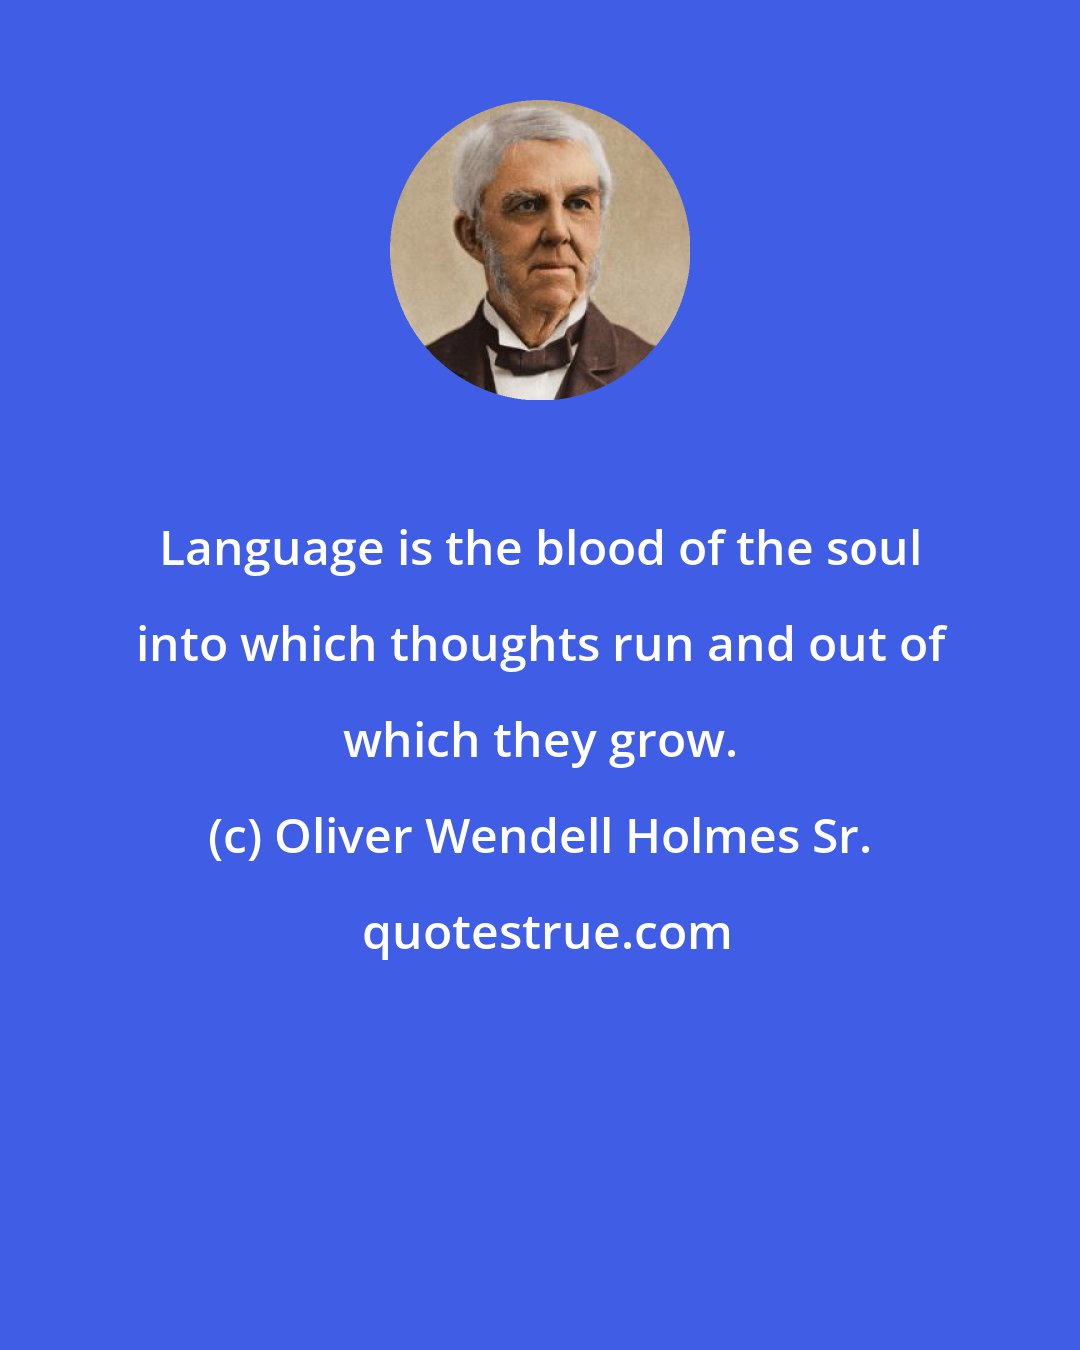 Oliver Wendell Holmes Sr.: Language is the blood of the soul into which thoughts run and out of which they grow.